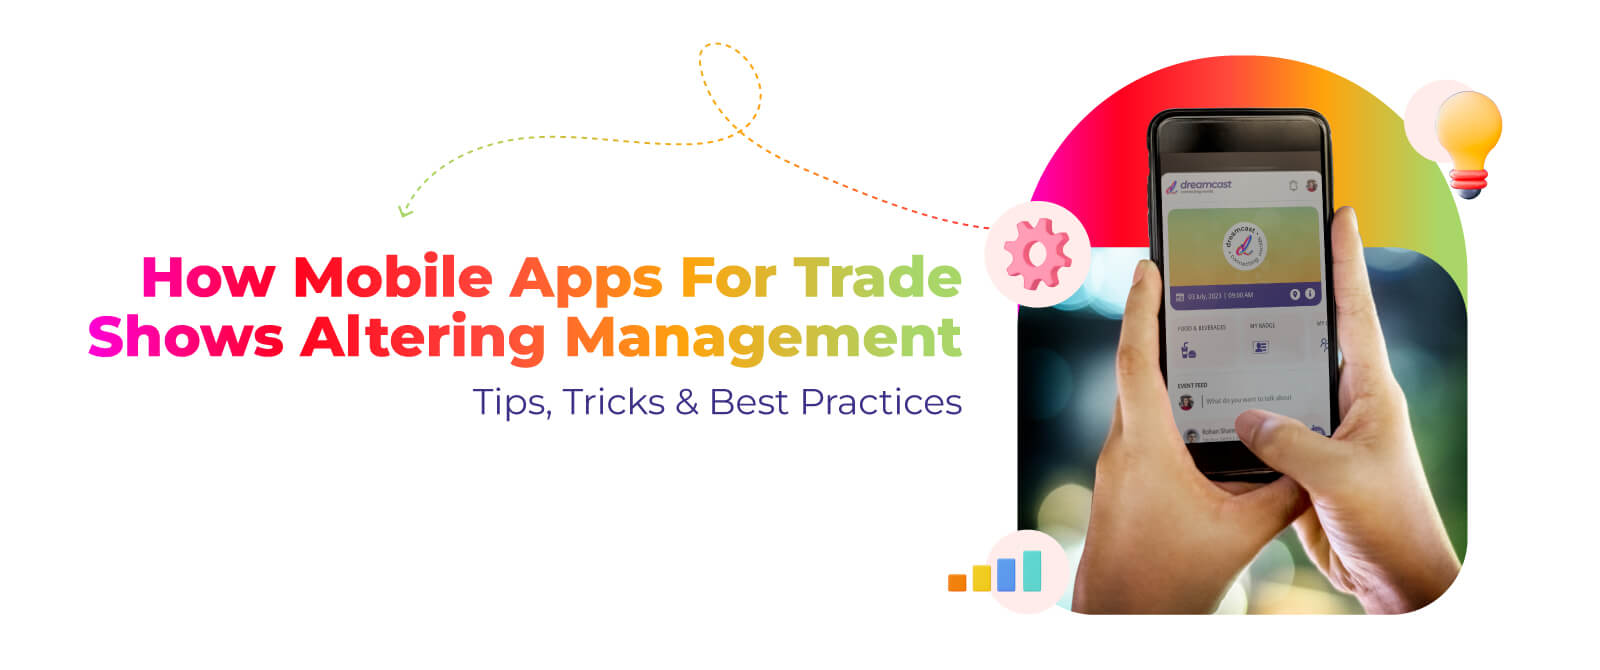 How Mobile Apps For Trade Shows Altering Management: Tips, Tricks & Best Practices